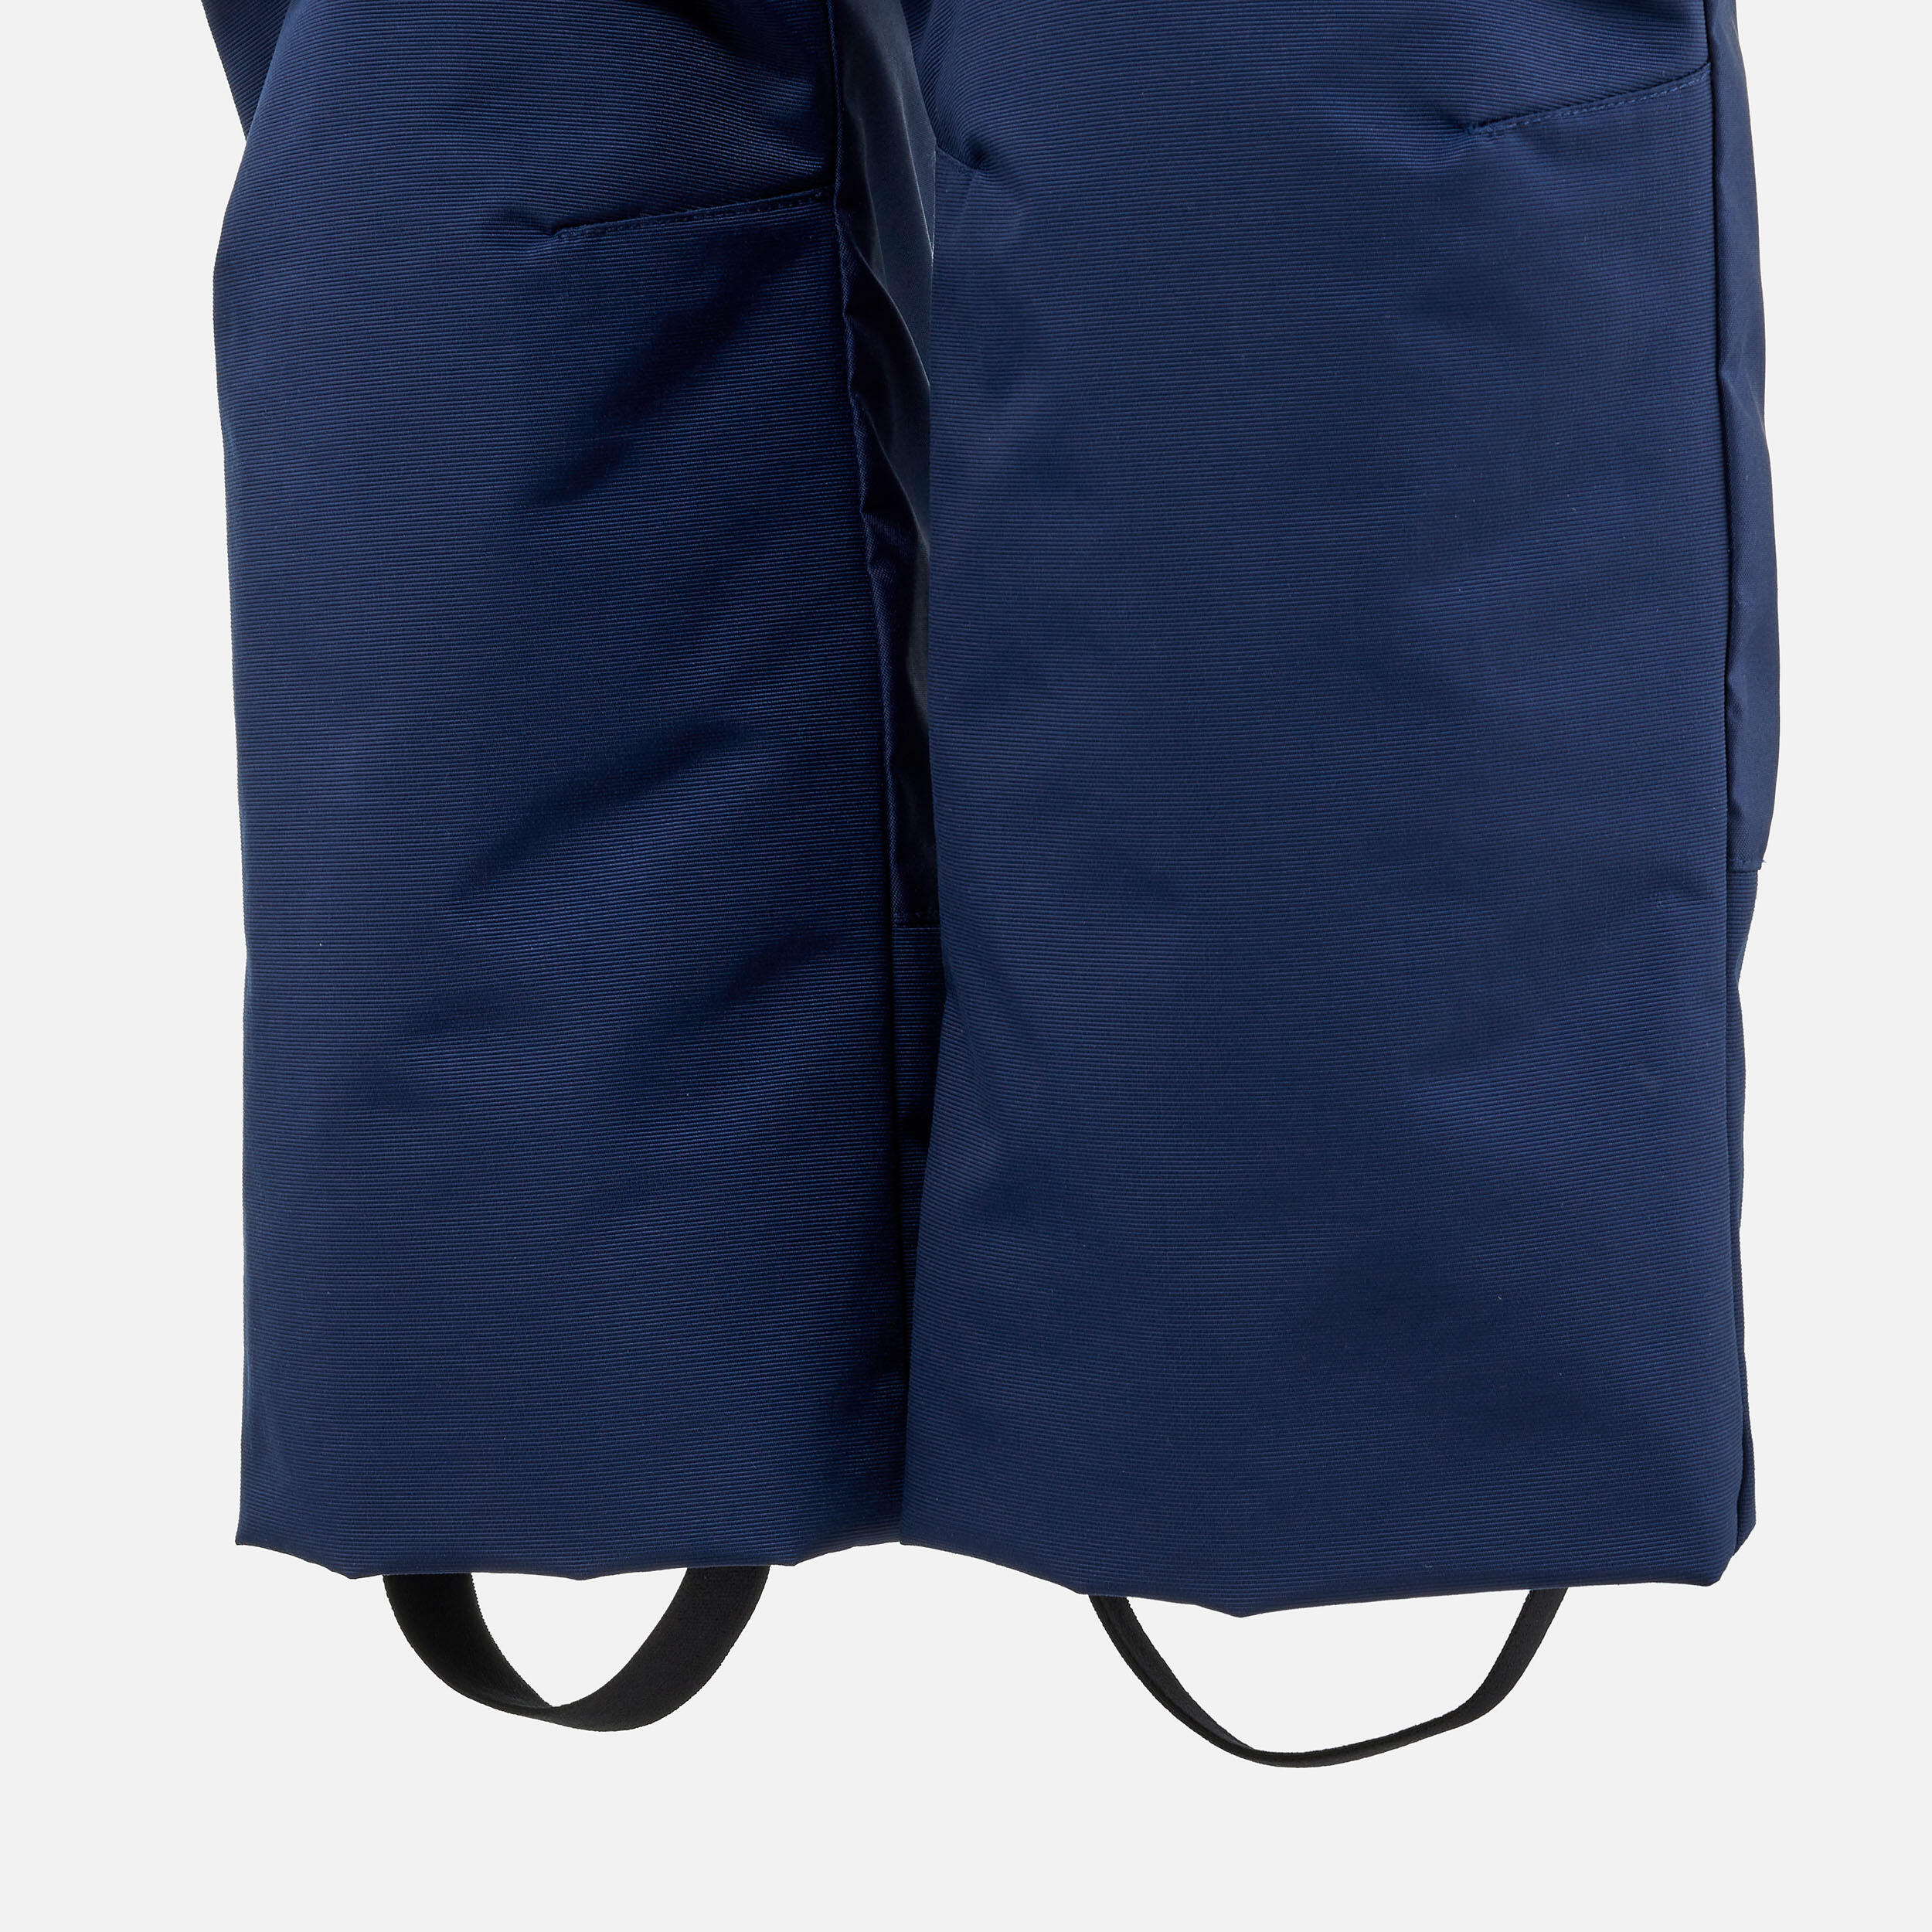 KIDS’ WARM AND WATERPROOF SKI SDUNGAREES - 500 PNF - NAVY BLUE  4/6